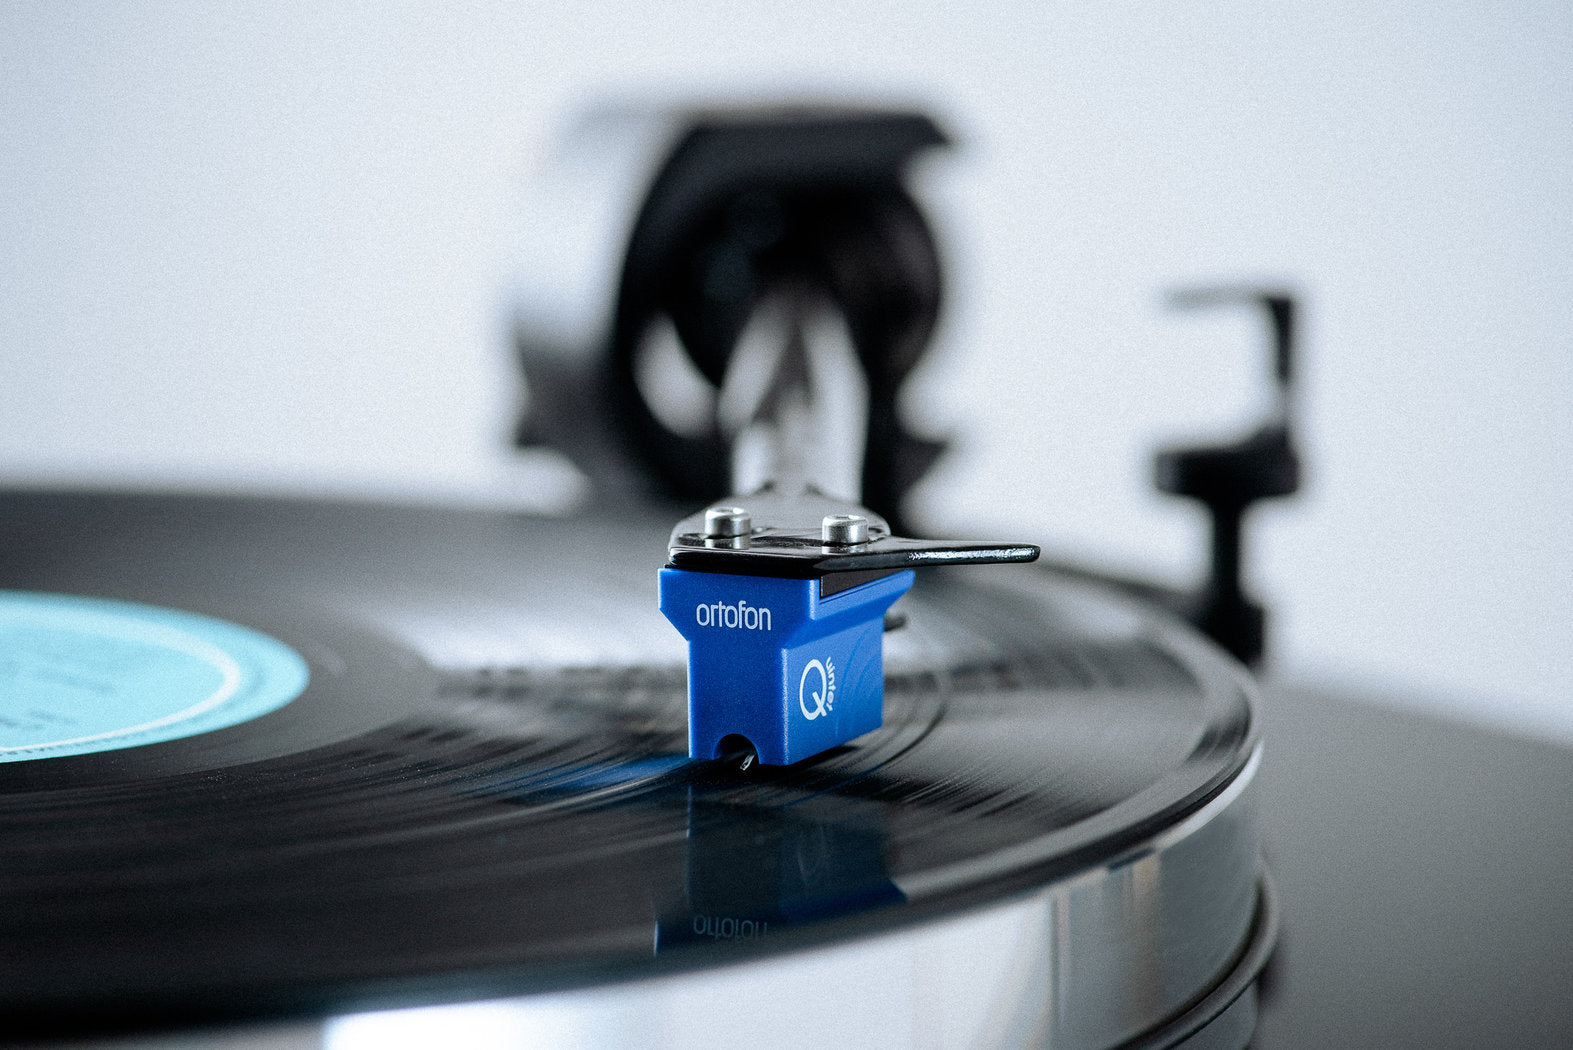 Pro-Ject X8 Evolution Superpack turntable